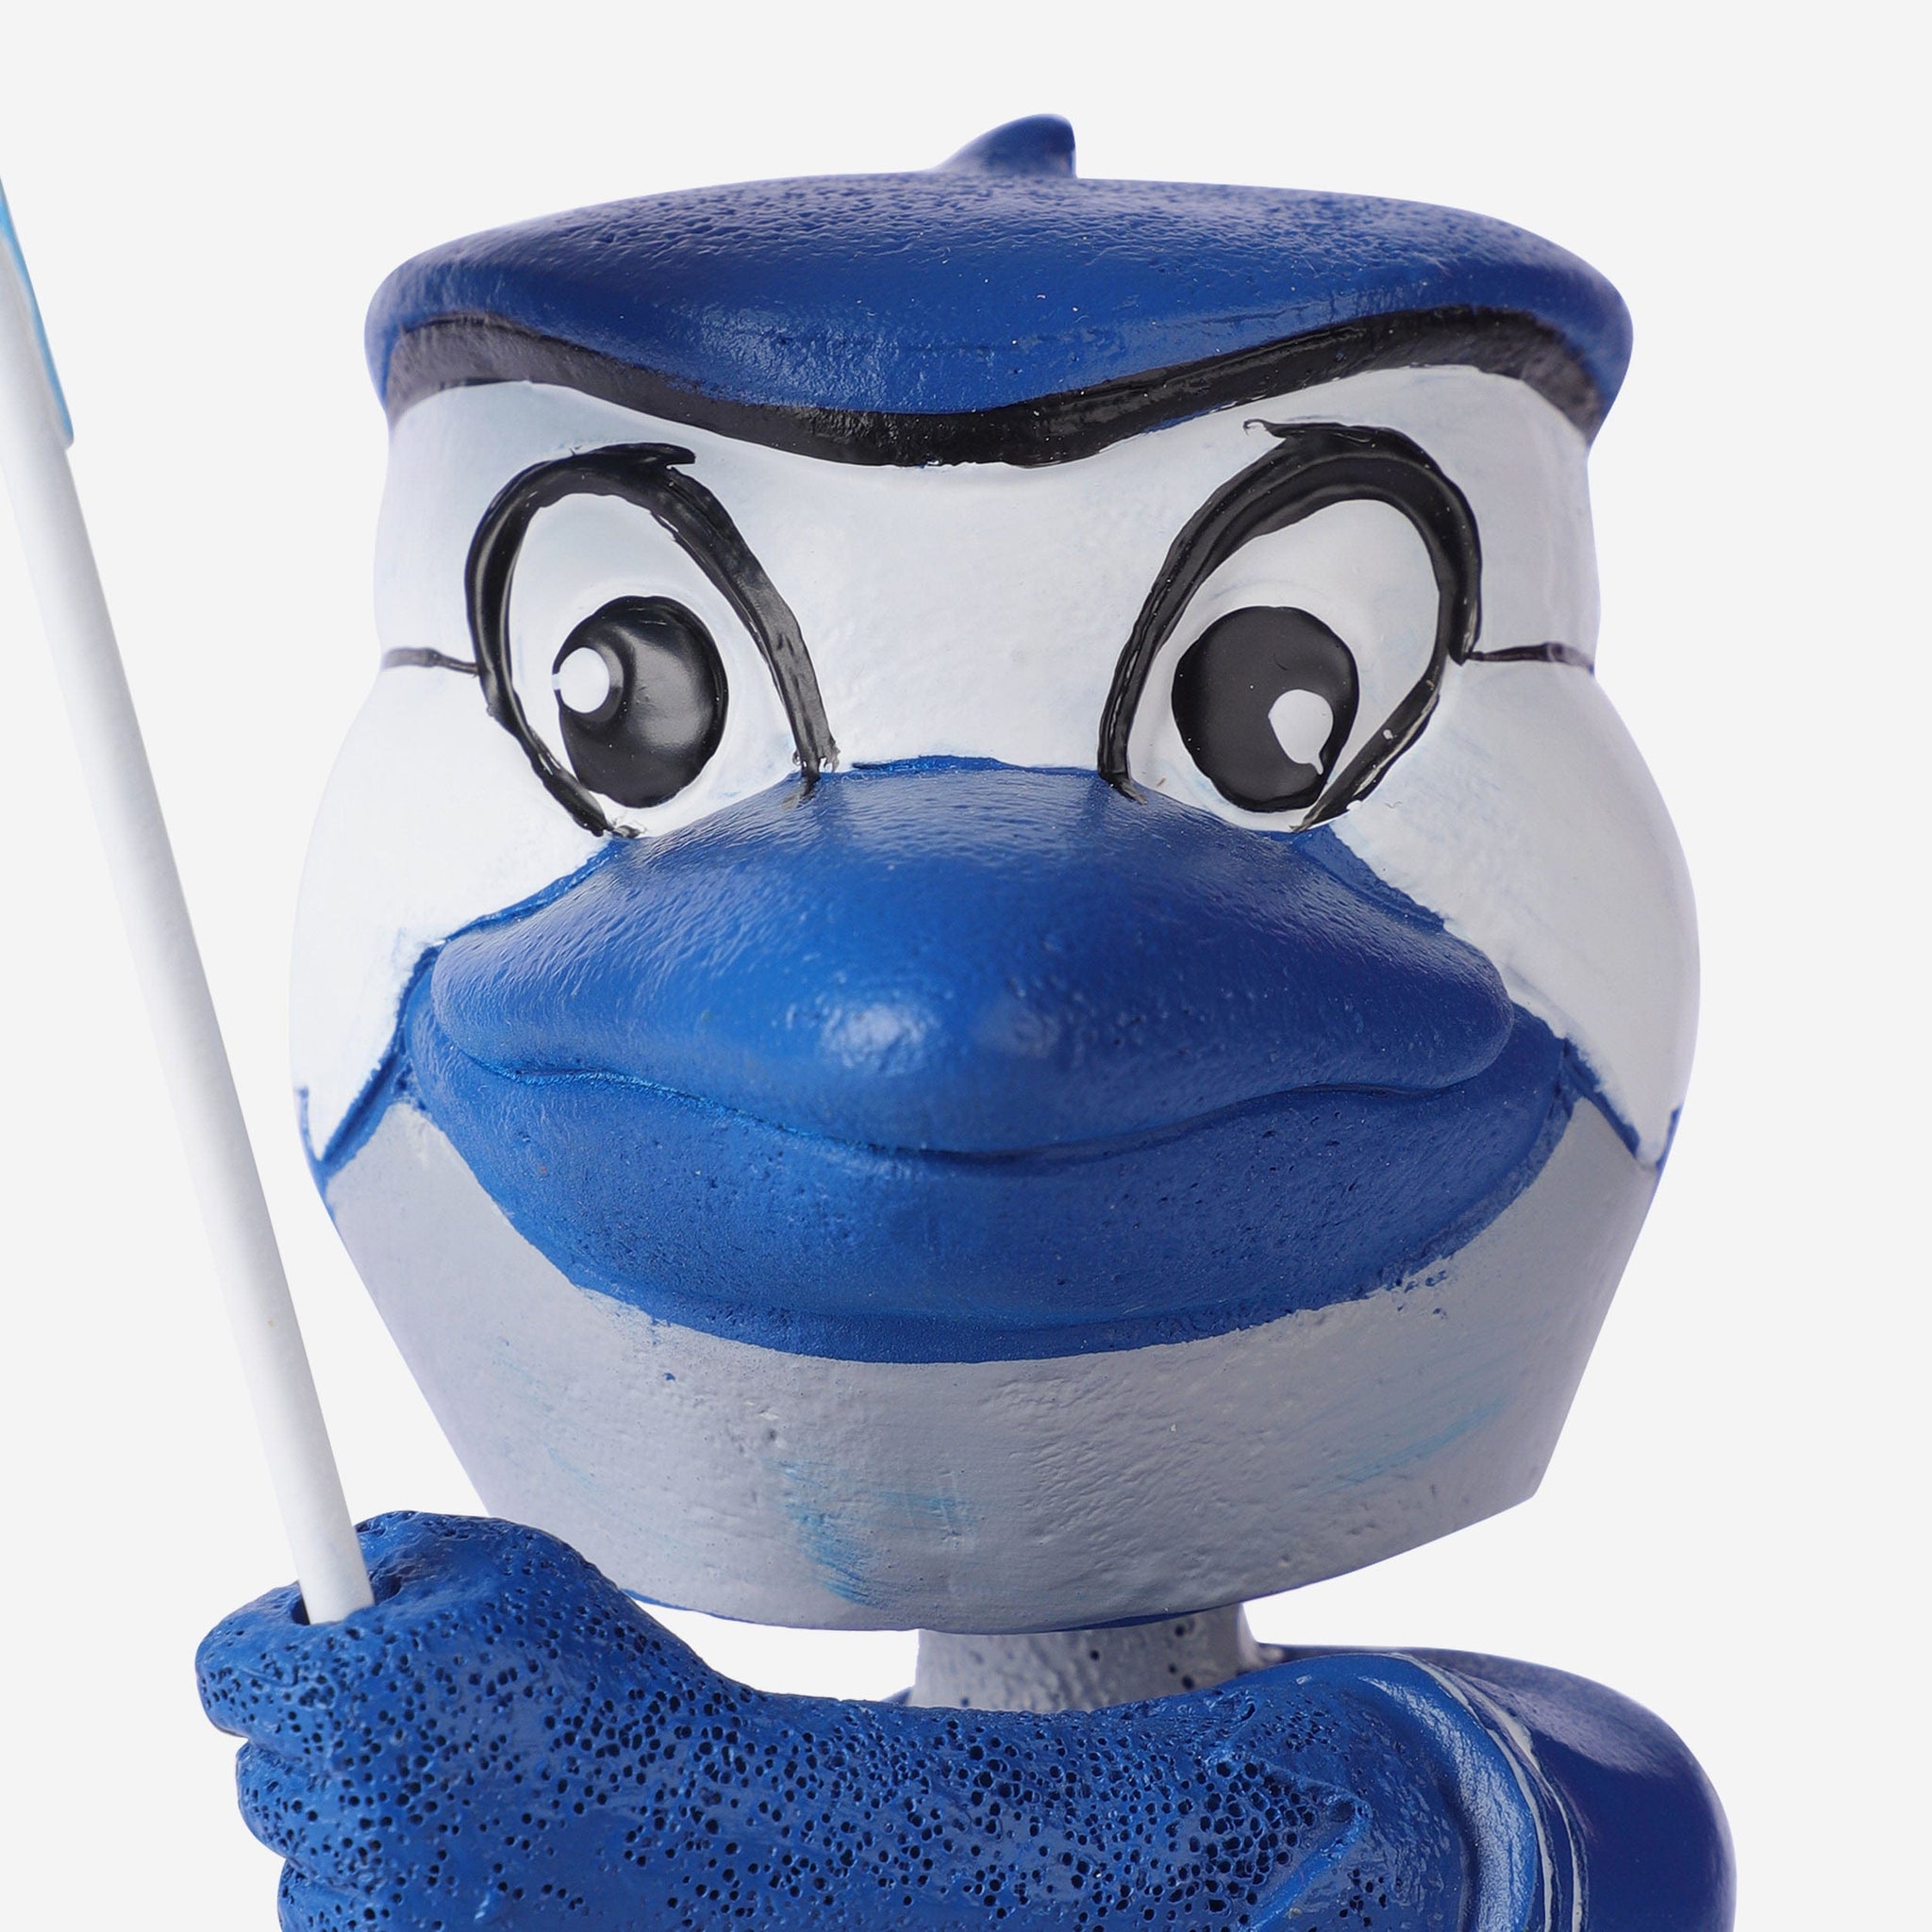 Ace Toronto Blue Jays Gate Series Mascot Bobblehead Officially Licensed by MLB